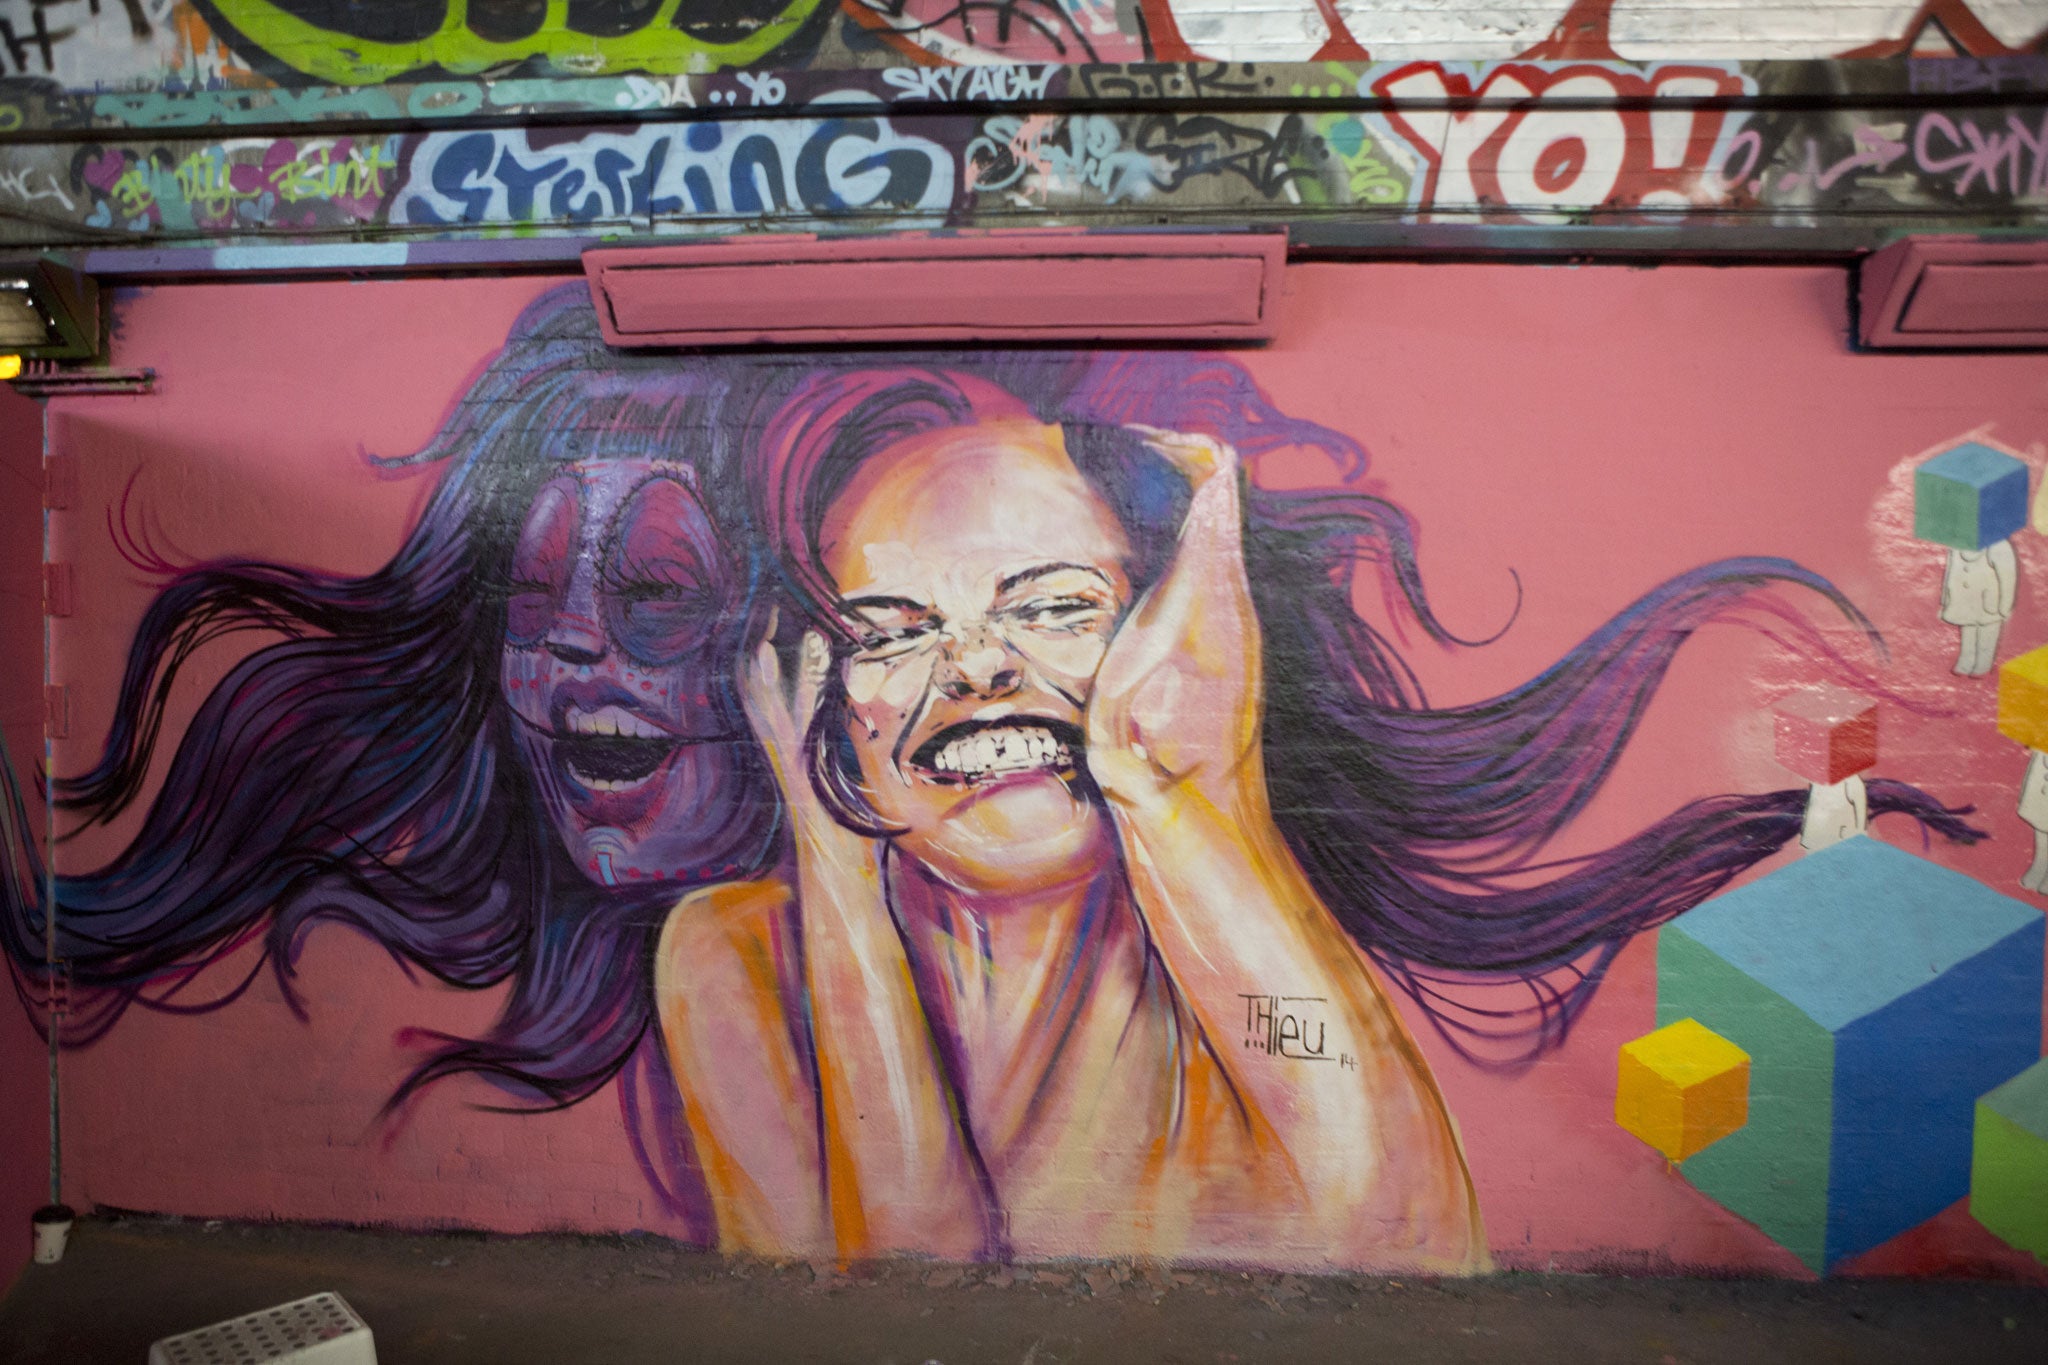 A mural painted in south London's Leake Street Tunnel as part of all-female street event Femme Fierce